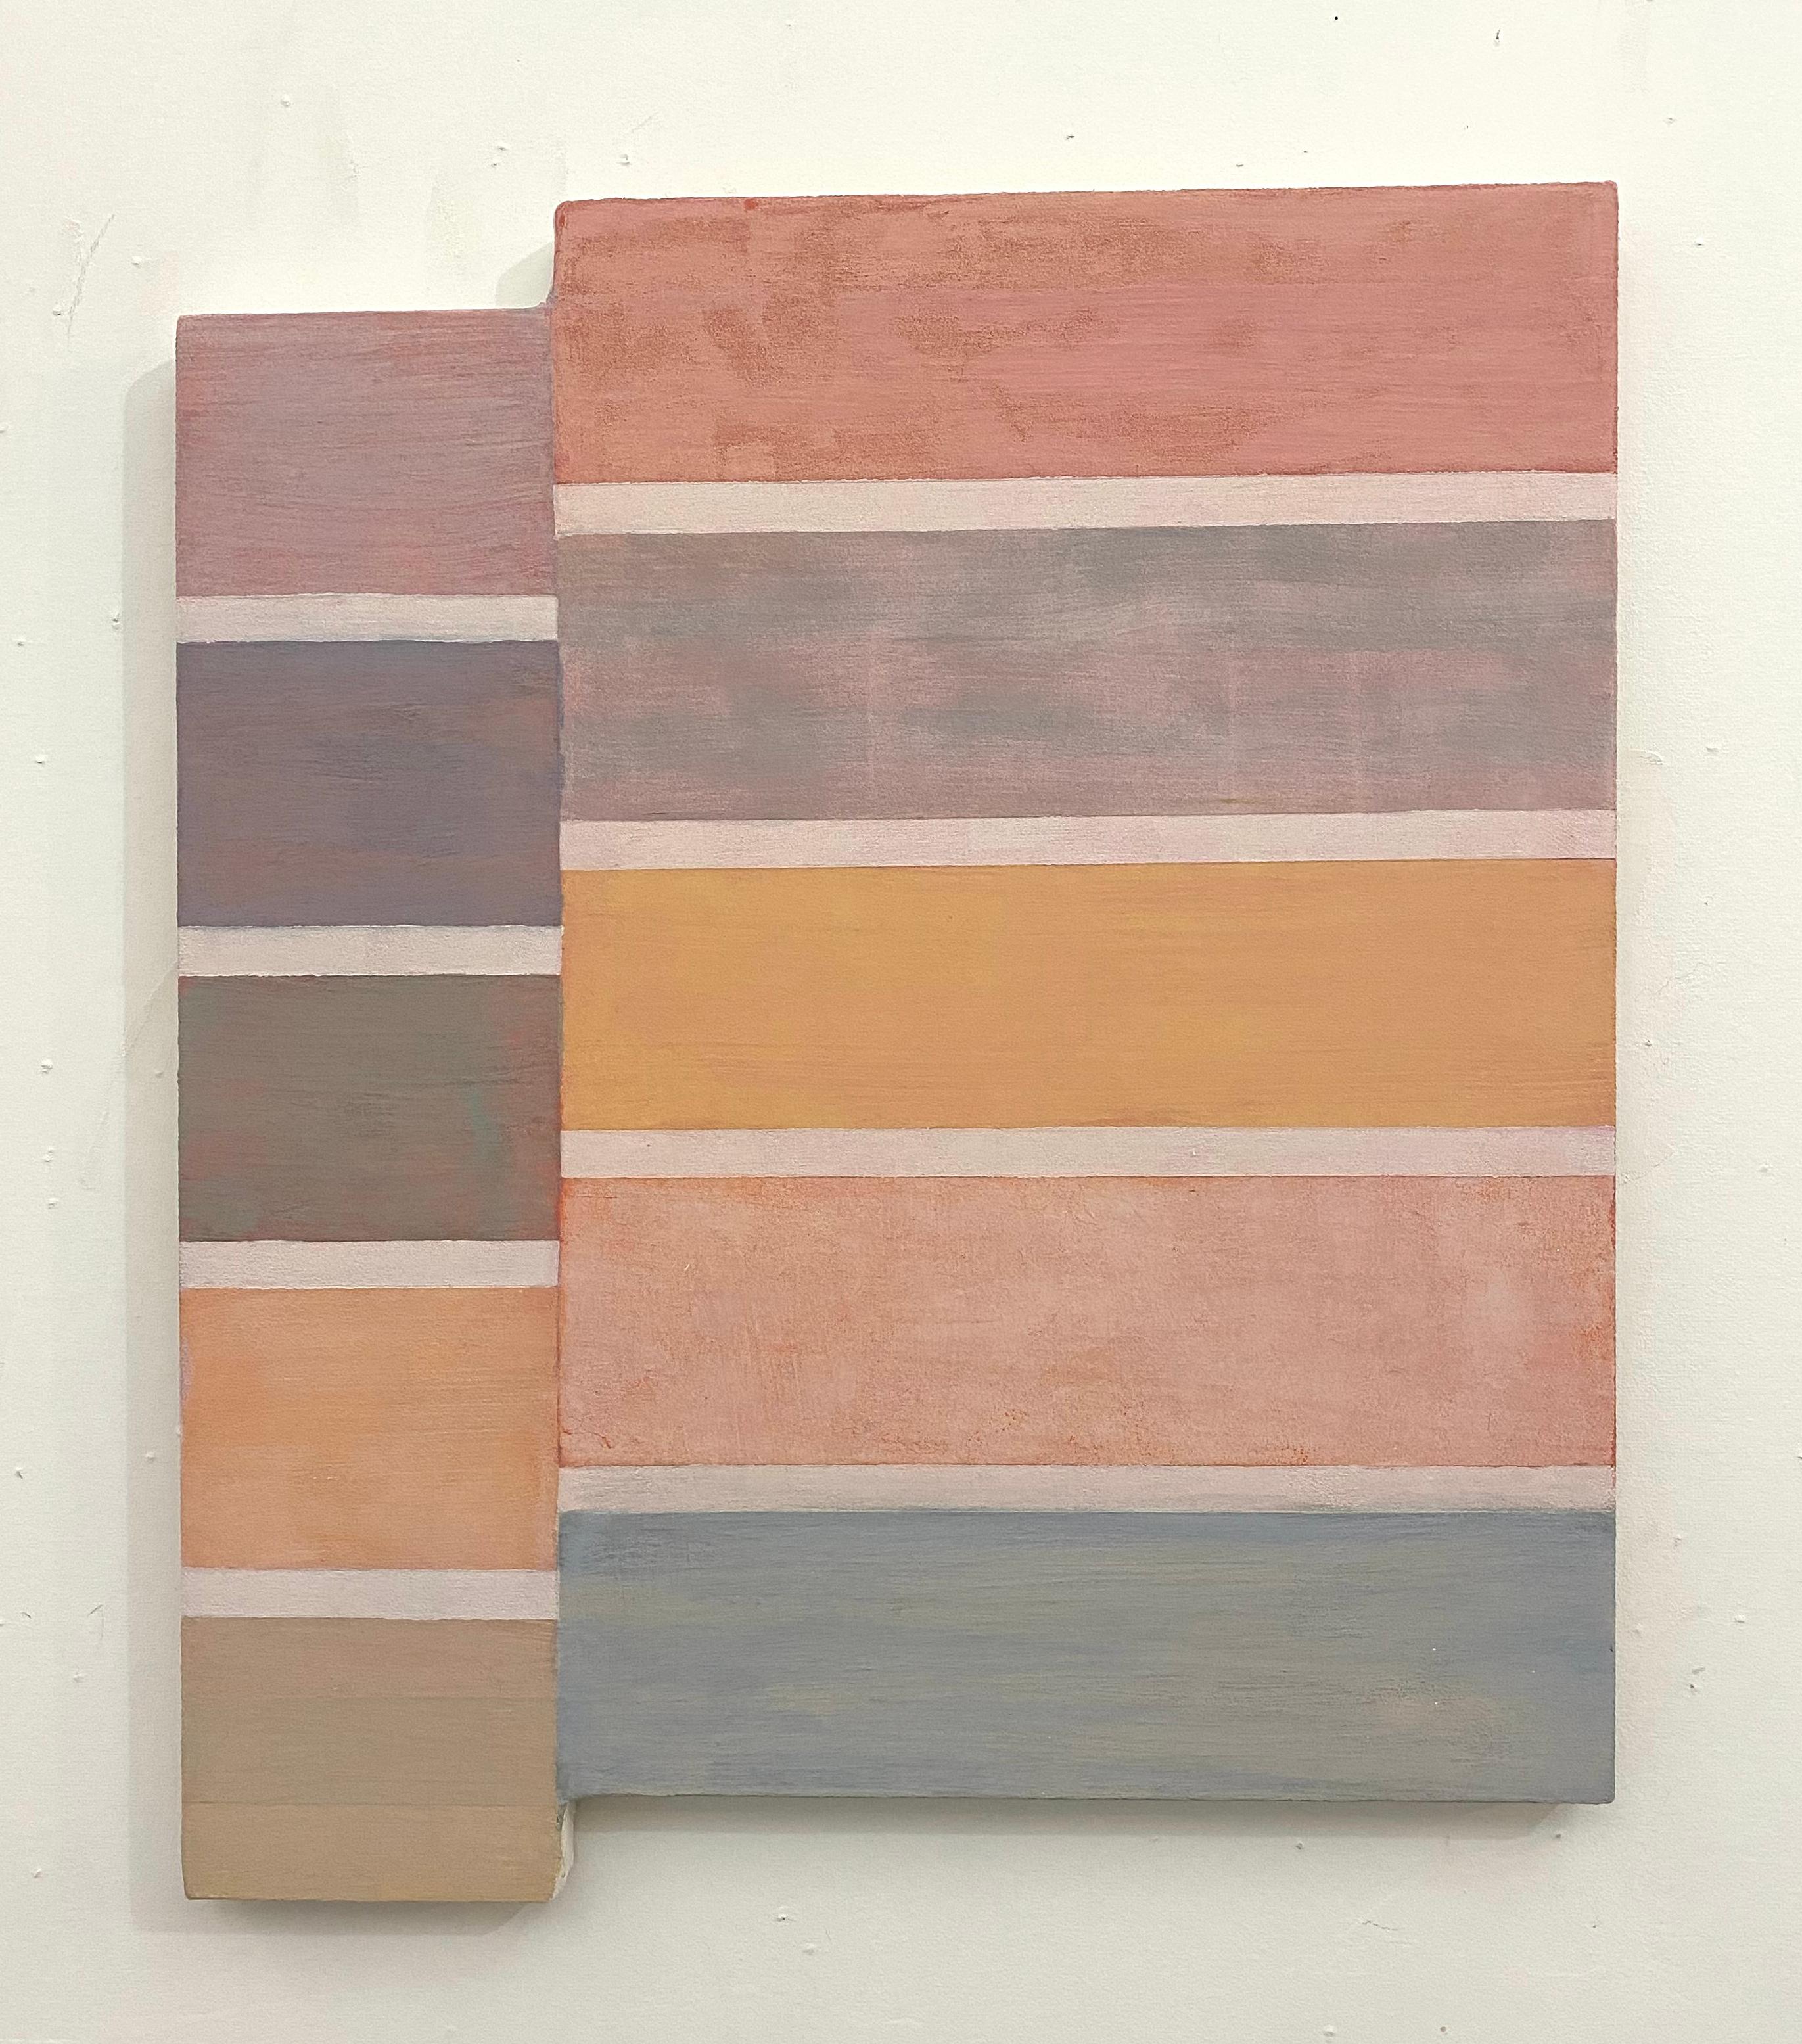 Elizabeth Gourlay Abstract Painting - C30, Peach, Mauve, Pink, Dusty Rose Beige Stripes, Pastel Color on Shaped Panel